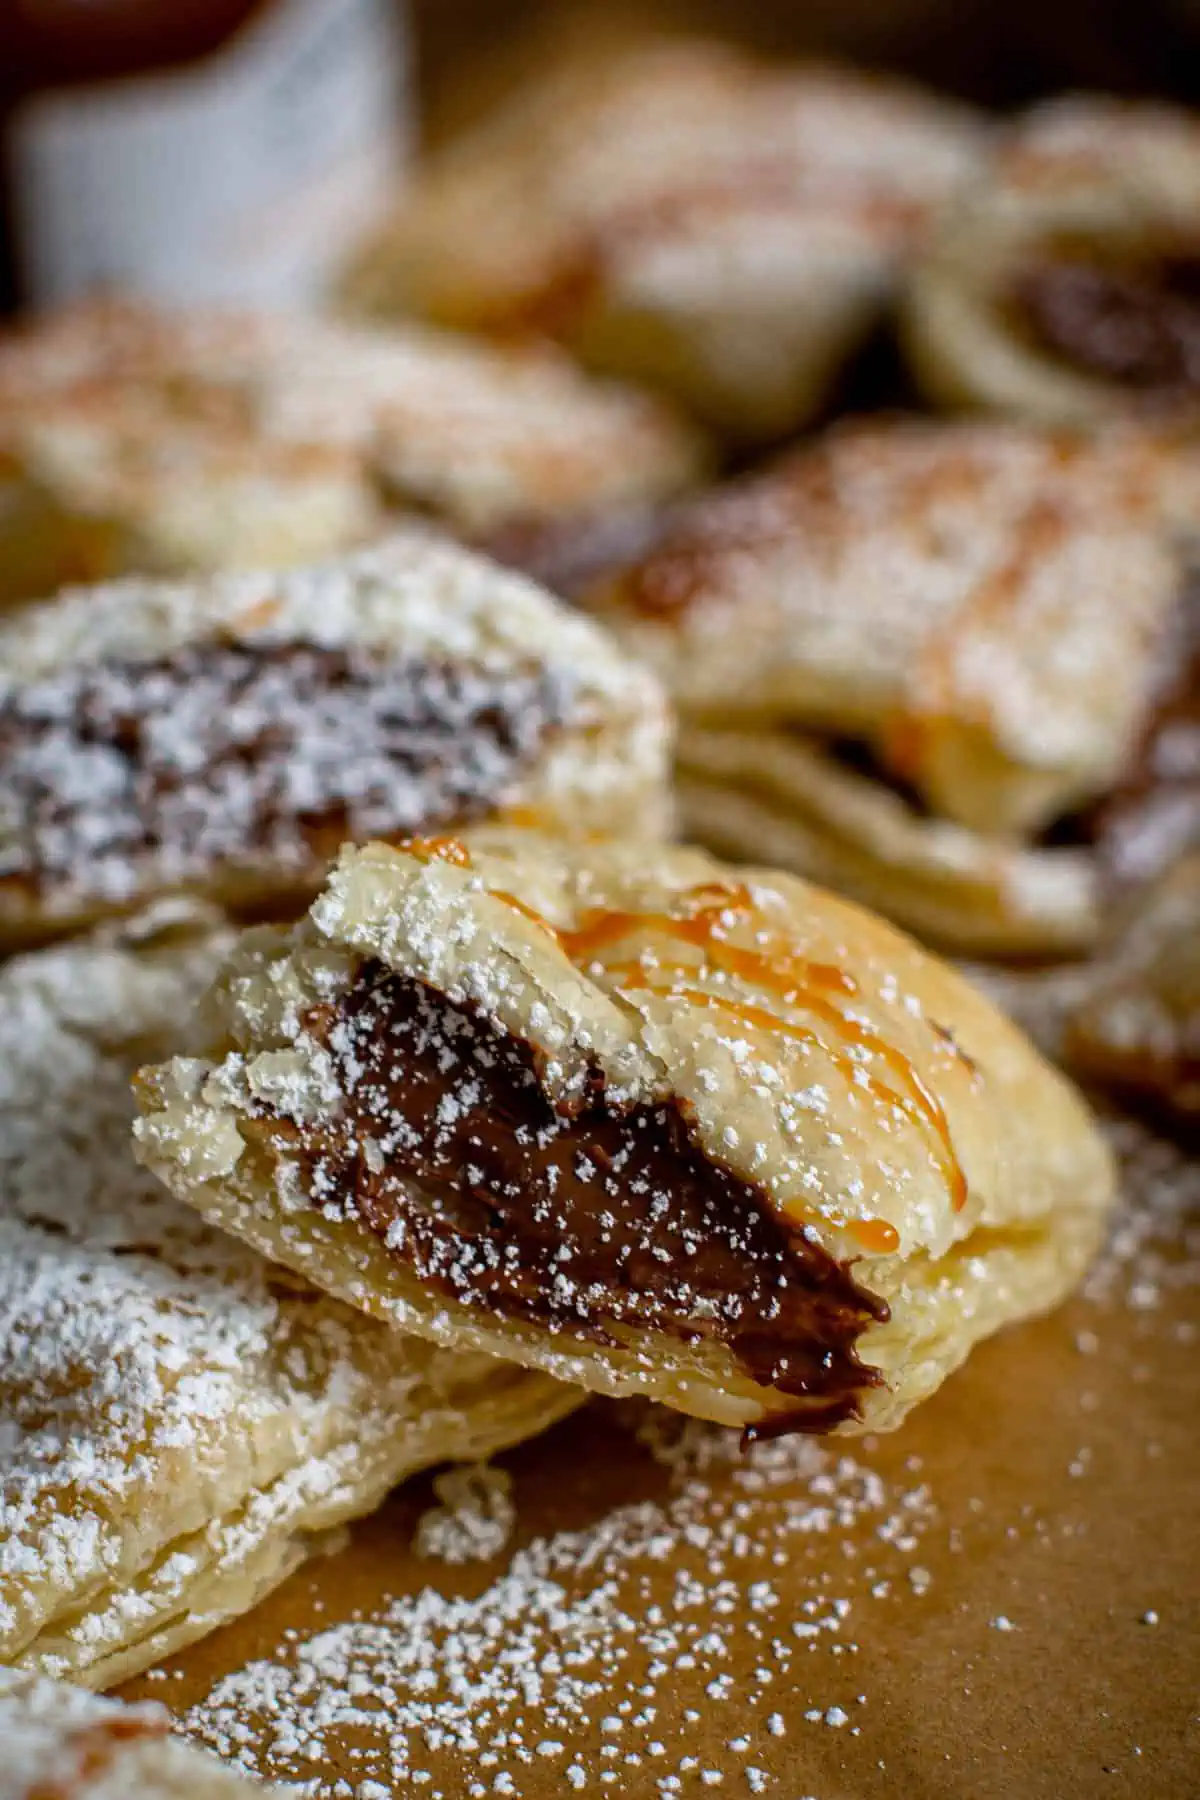 Puff pastry with Nutella.